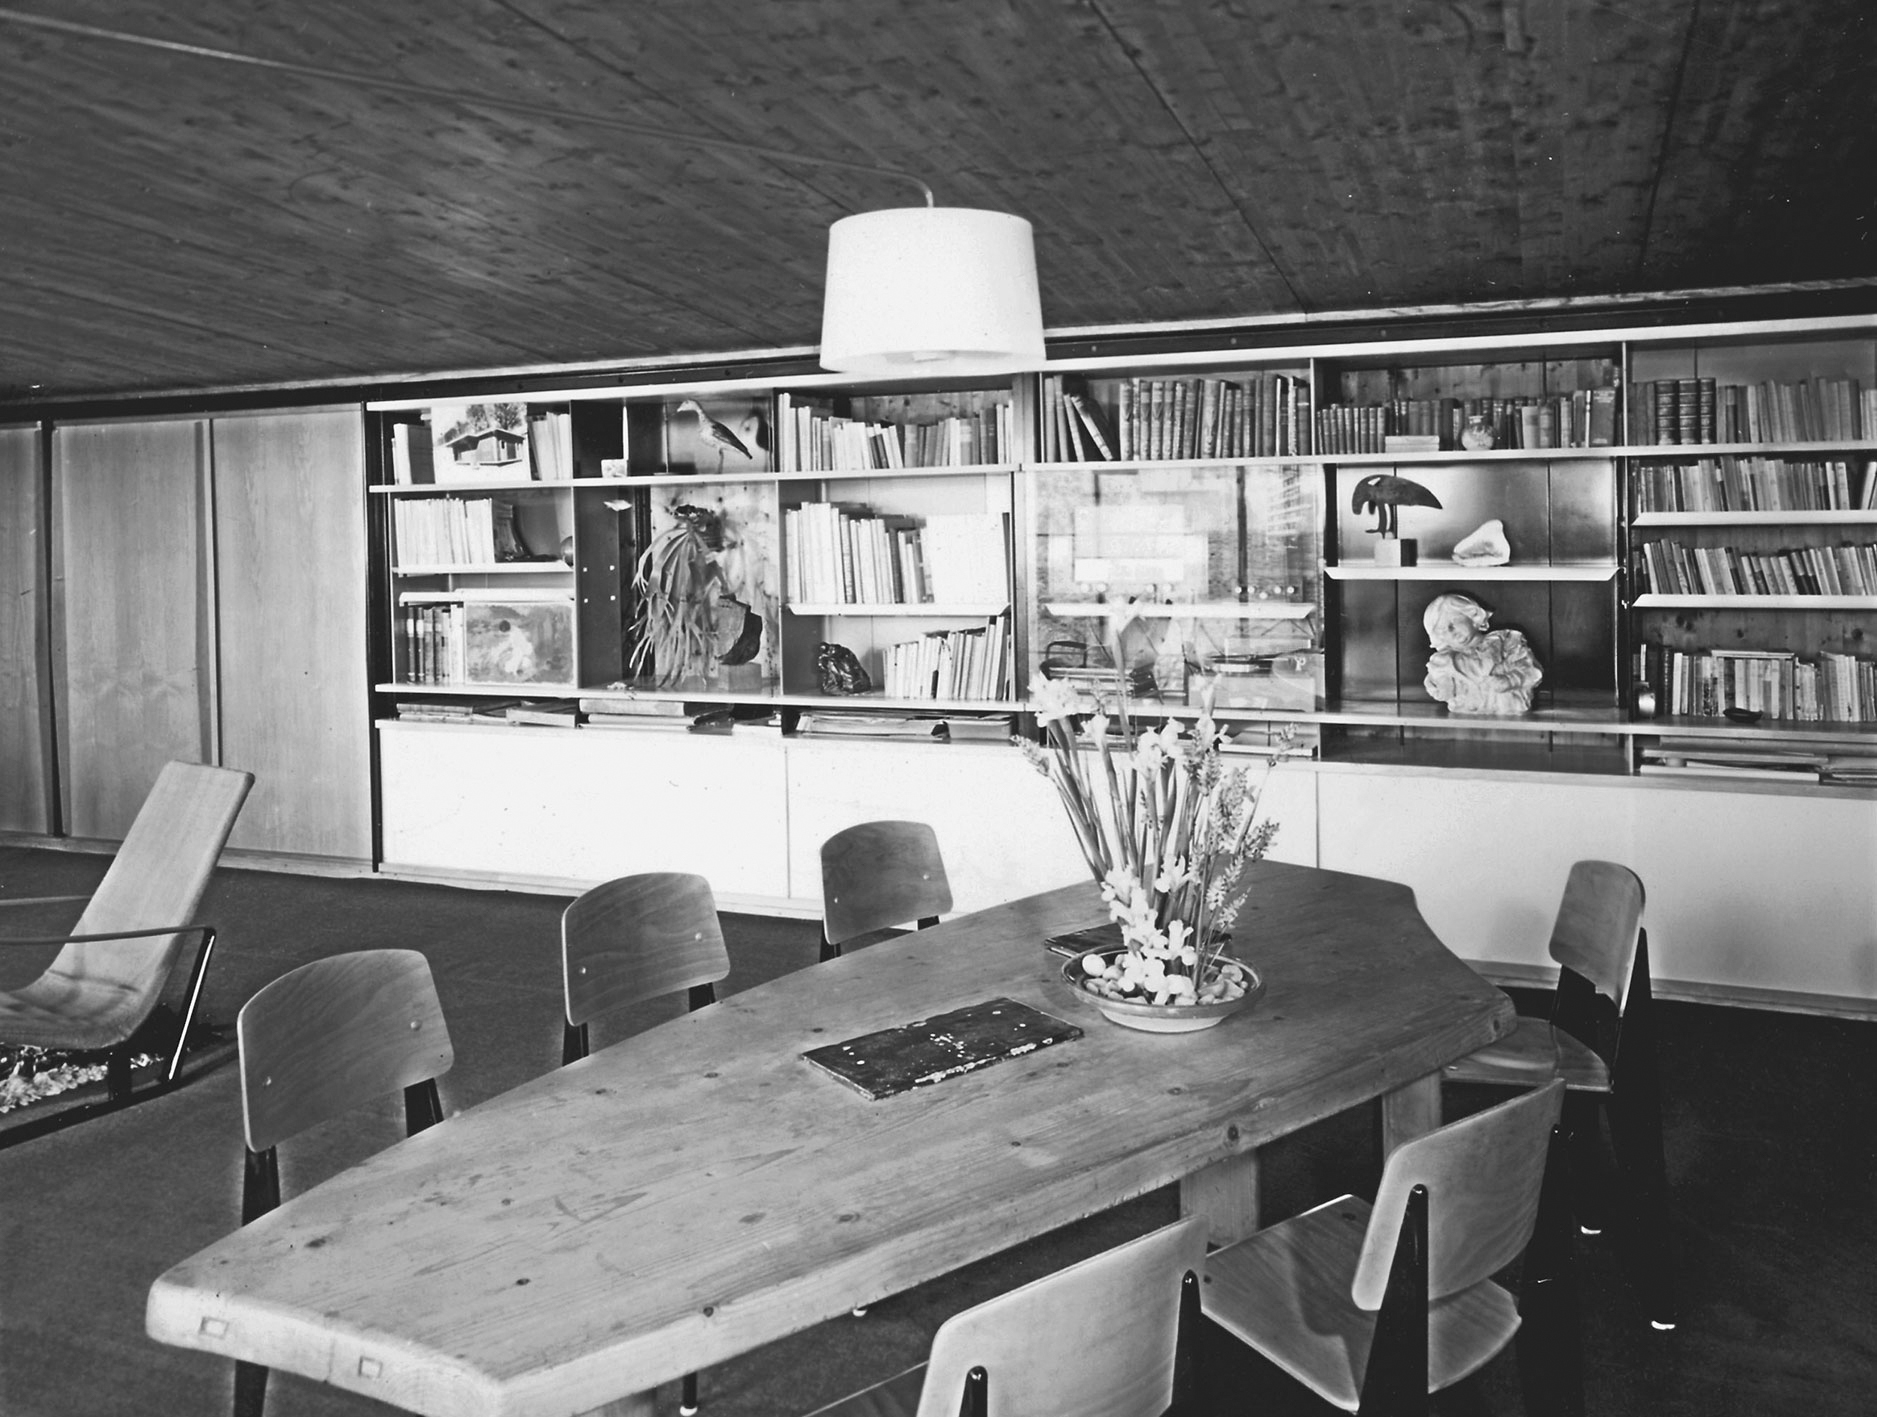 Jean Prouvé’s house, Nancy, 1954, the dining area furnished with the Métropole no. 305 chairs. “These chairs constitute a sort of performance around a table”, Jean Prouvé.